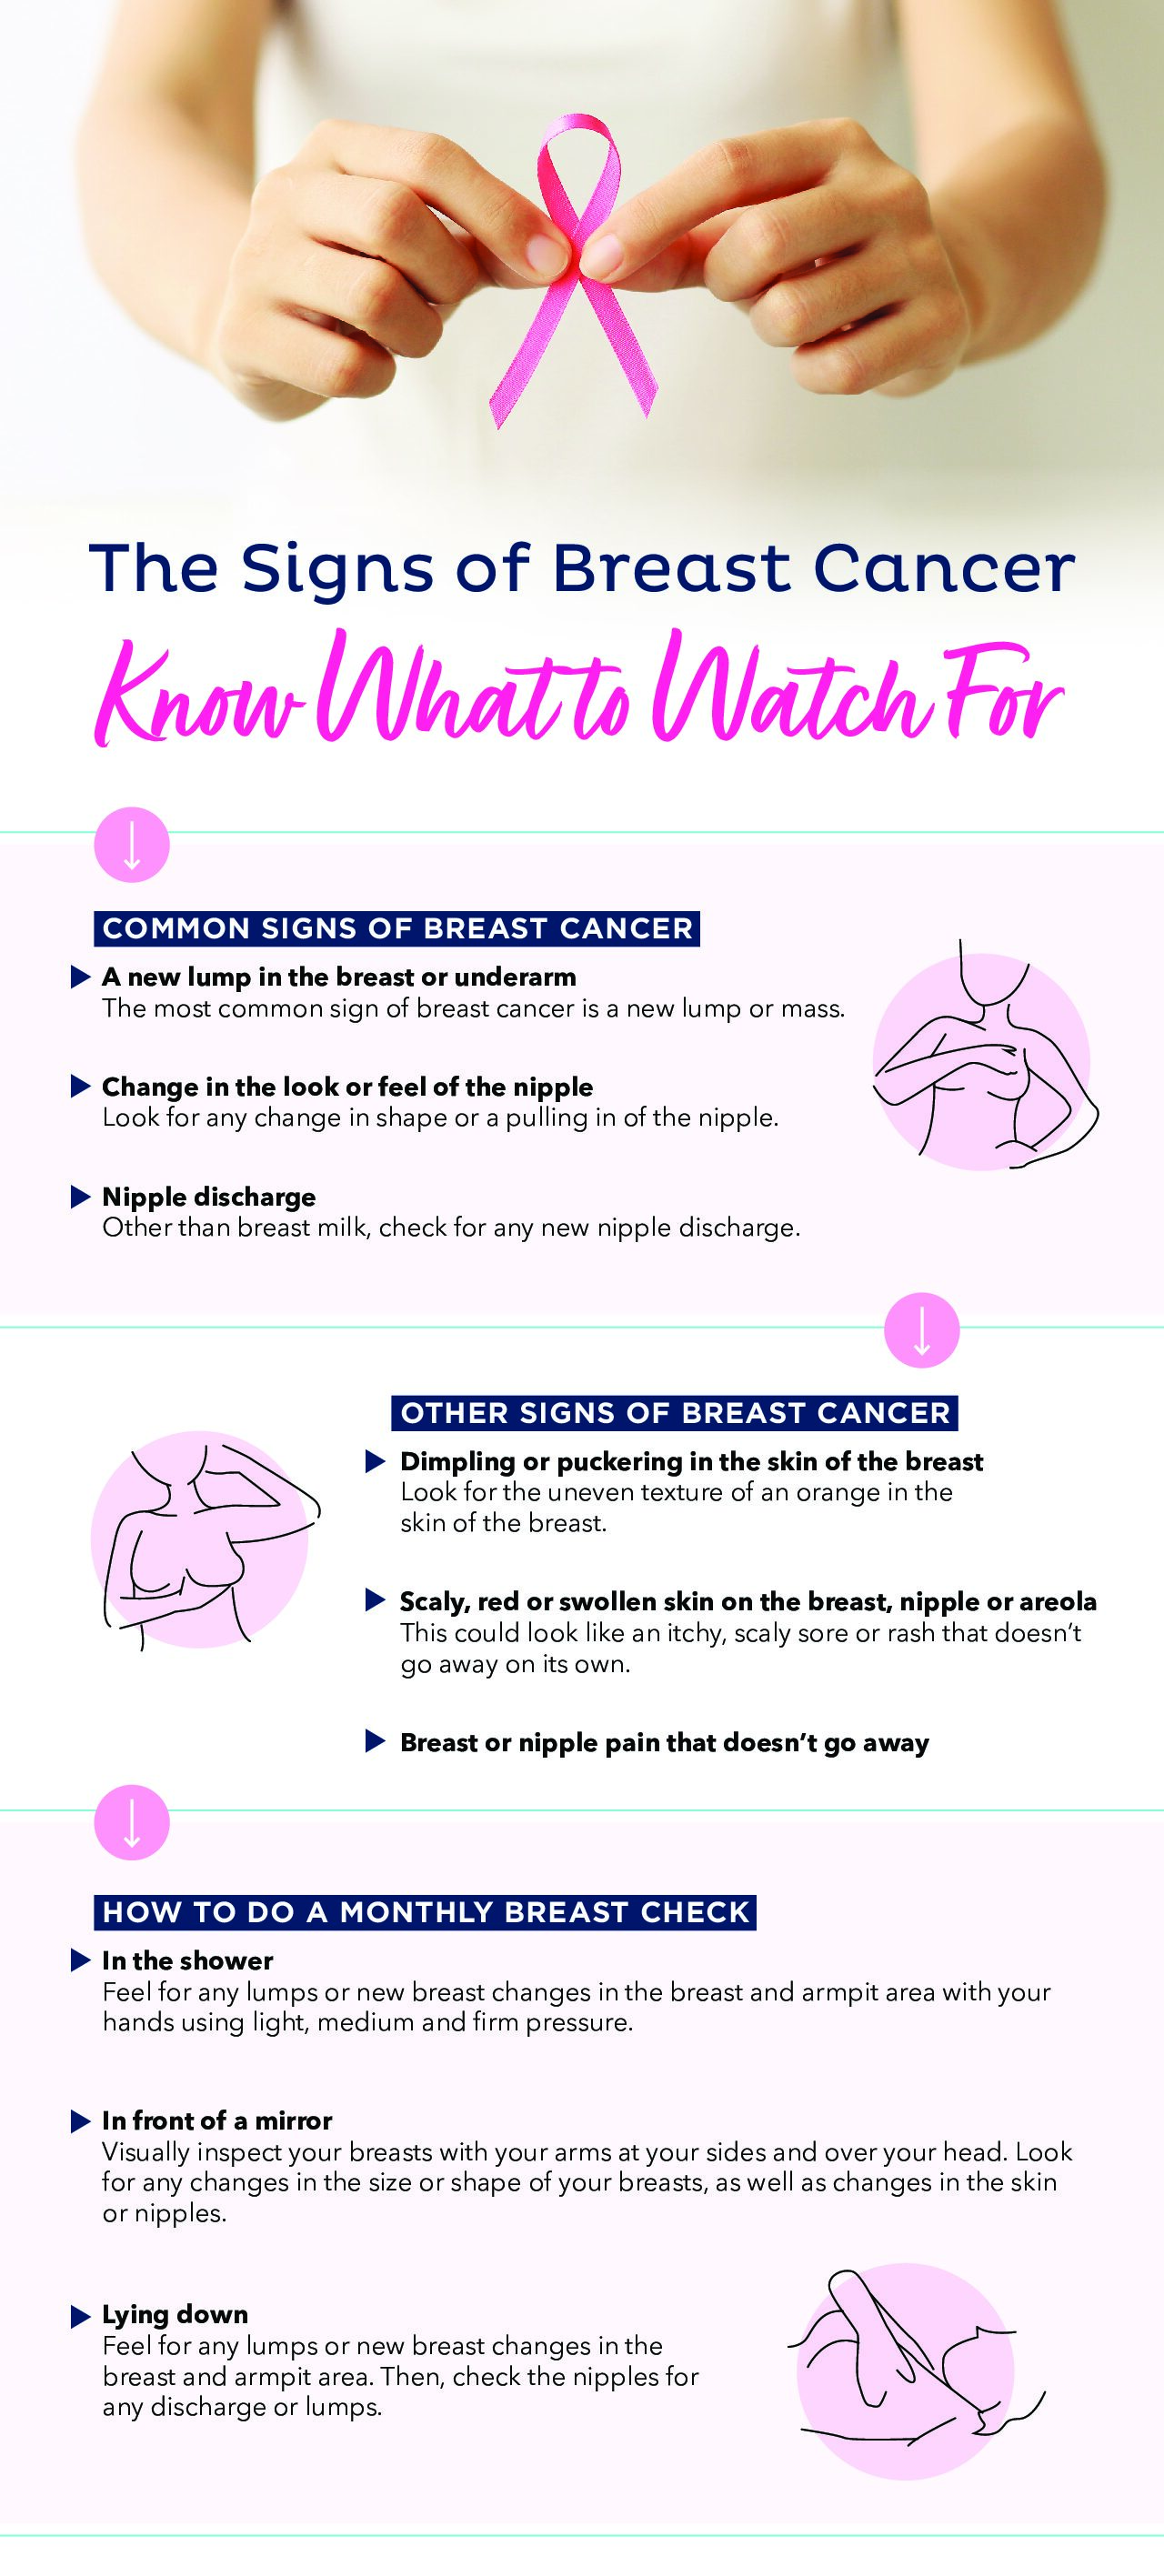 6 possible reasons for breast pain